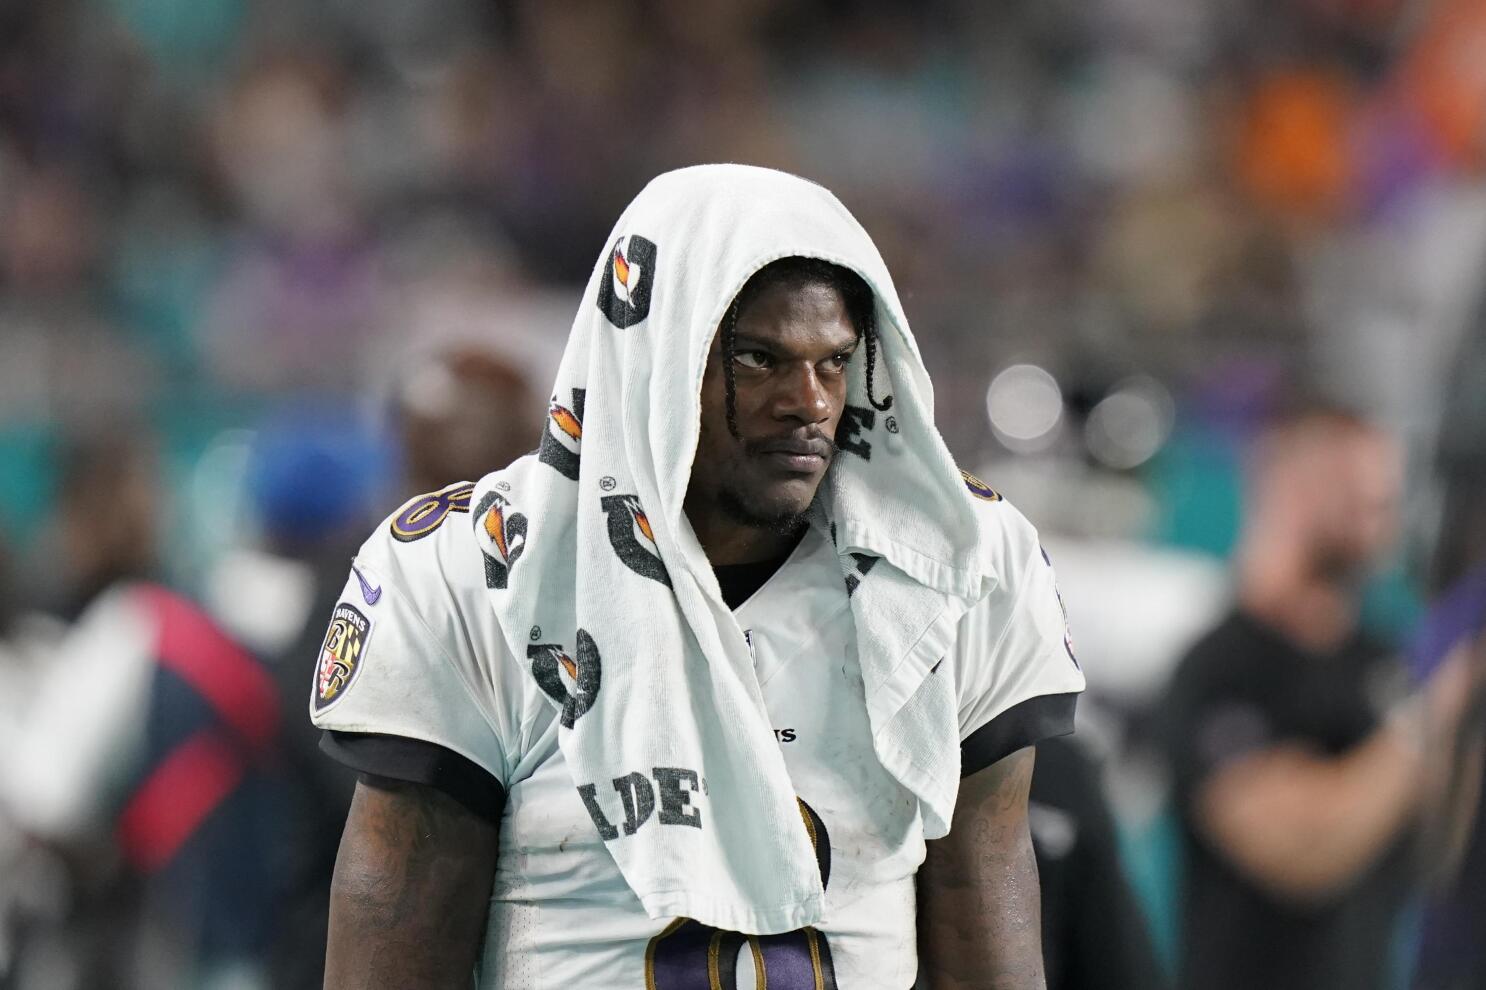 An unhappy homecoming this time for Ravens QB Lamar Jackson